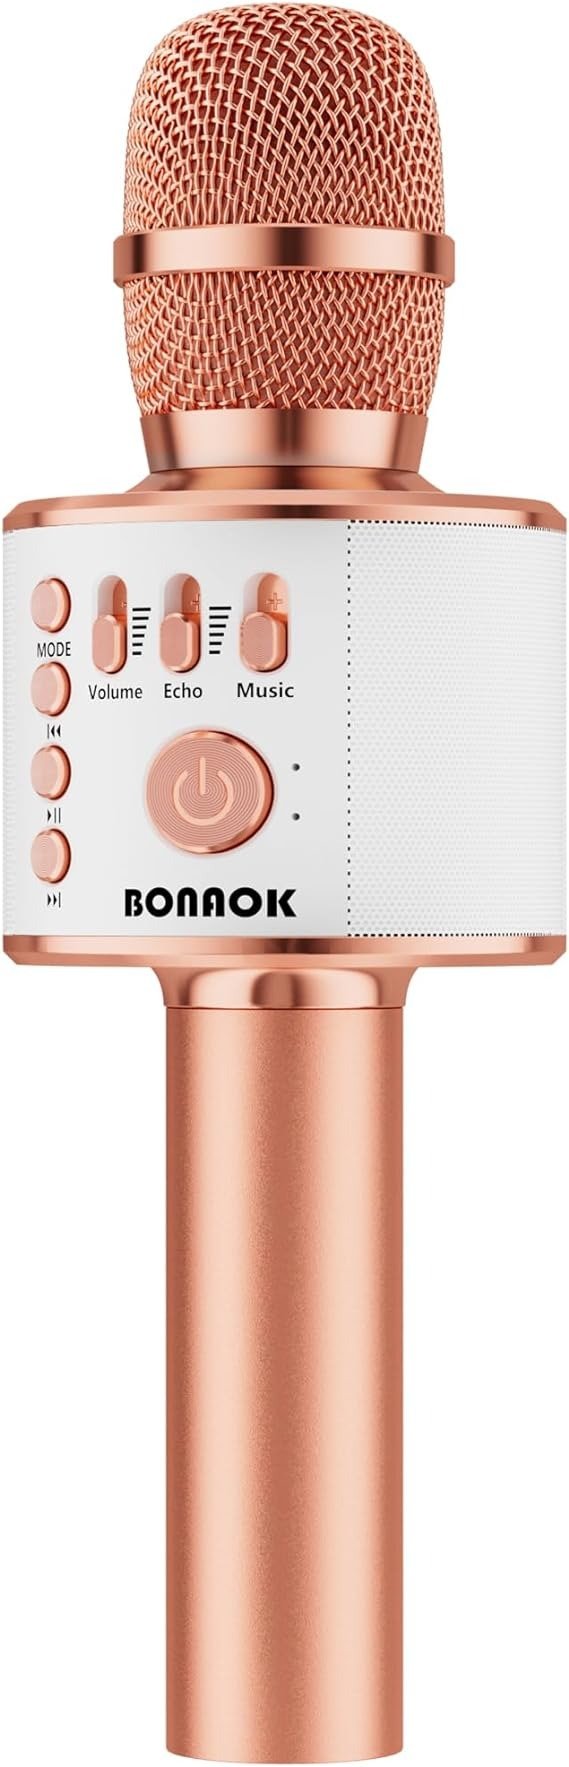 Wireless Bluetooth Karaoke Microphone,3-in-1 Portable Handheld karaoke Mic Easter Gift Home Party Birthday Speaker Machine for iPhone/Android/iPad/Sony, PC and All Smartphone(Rose Gold)